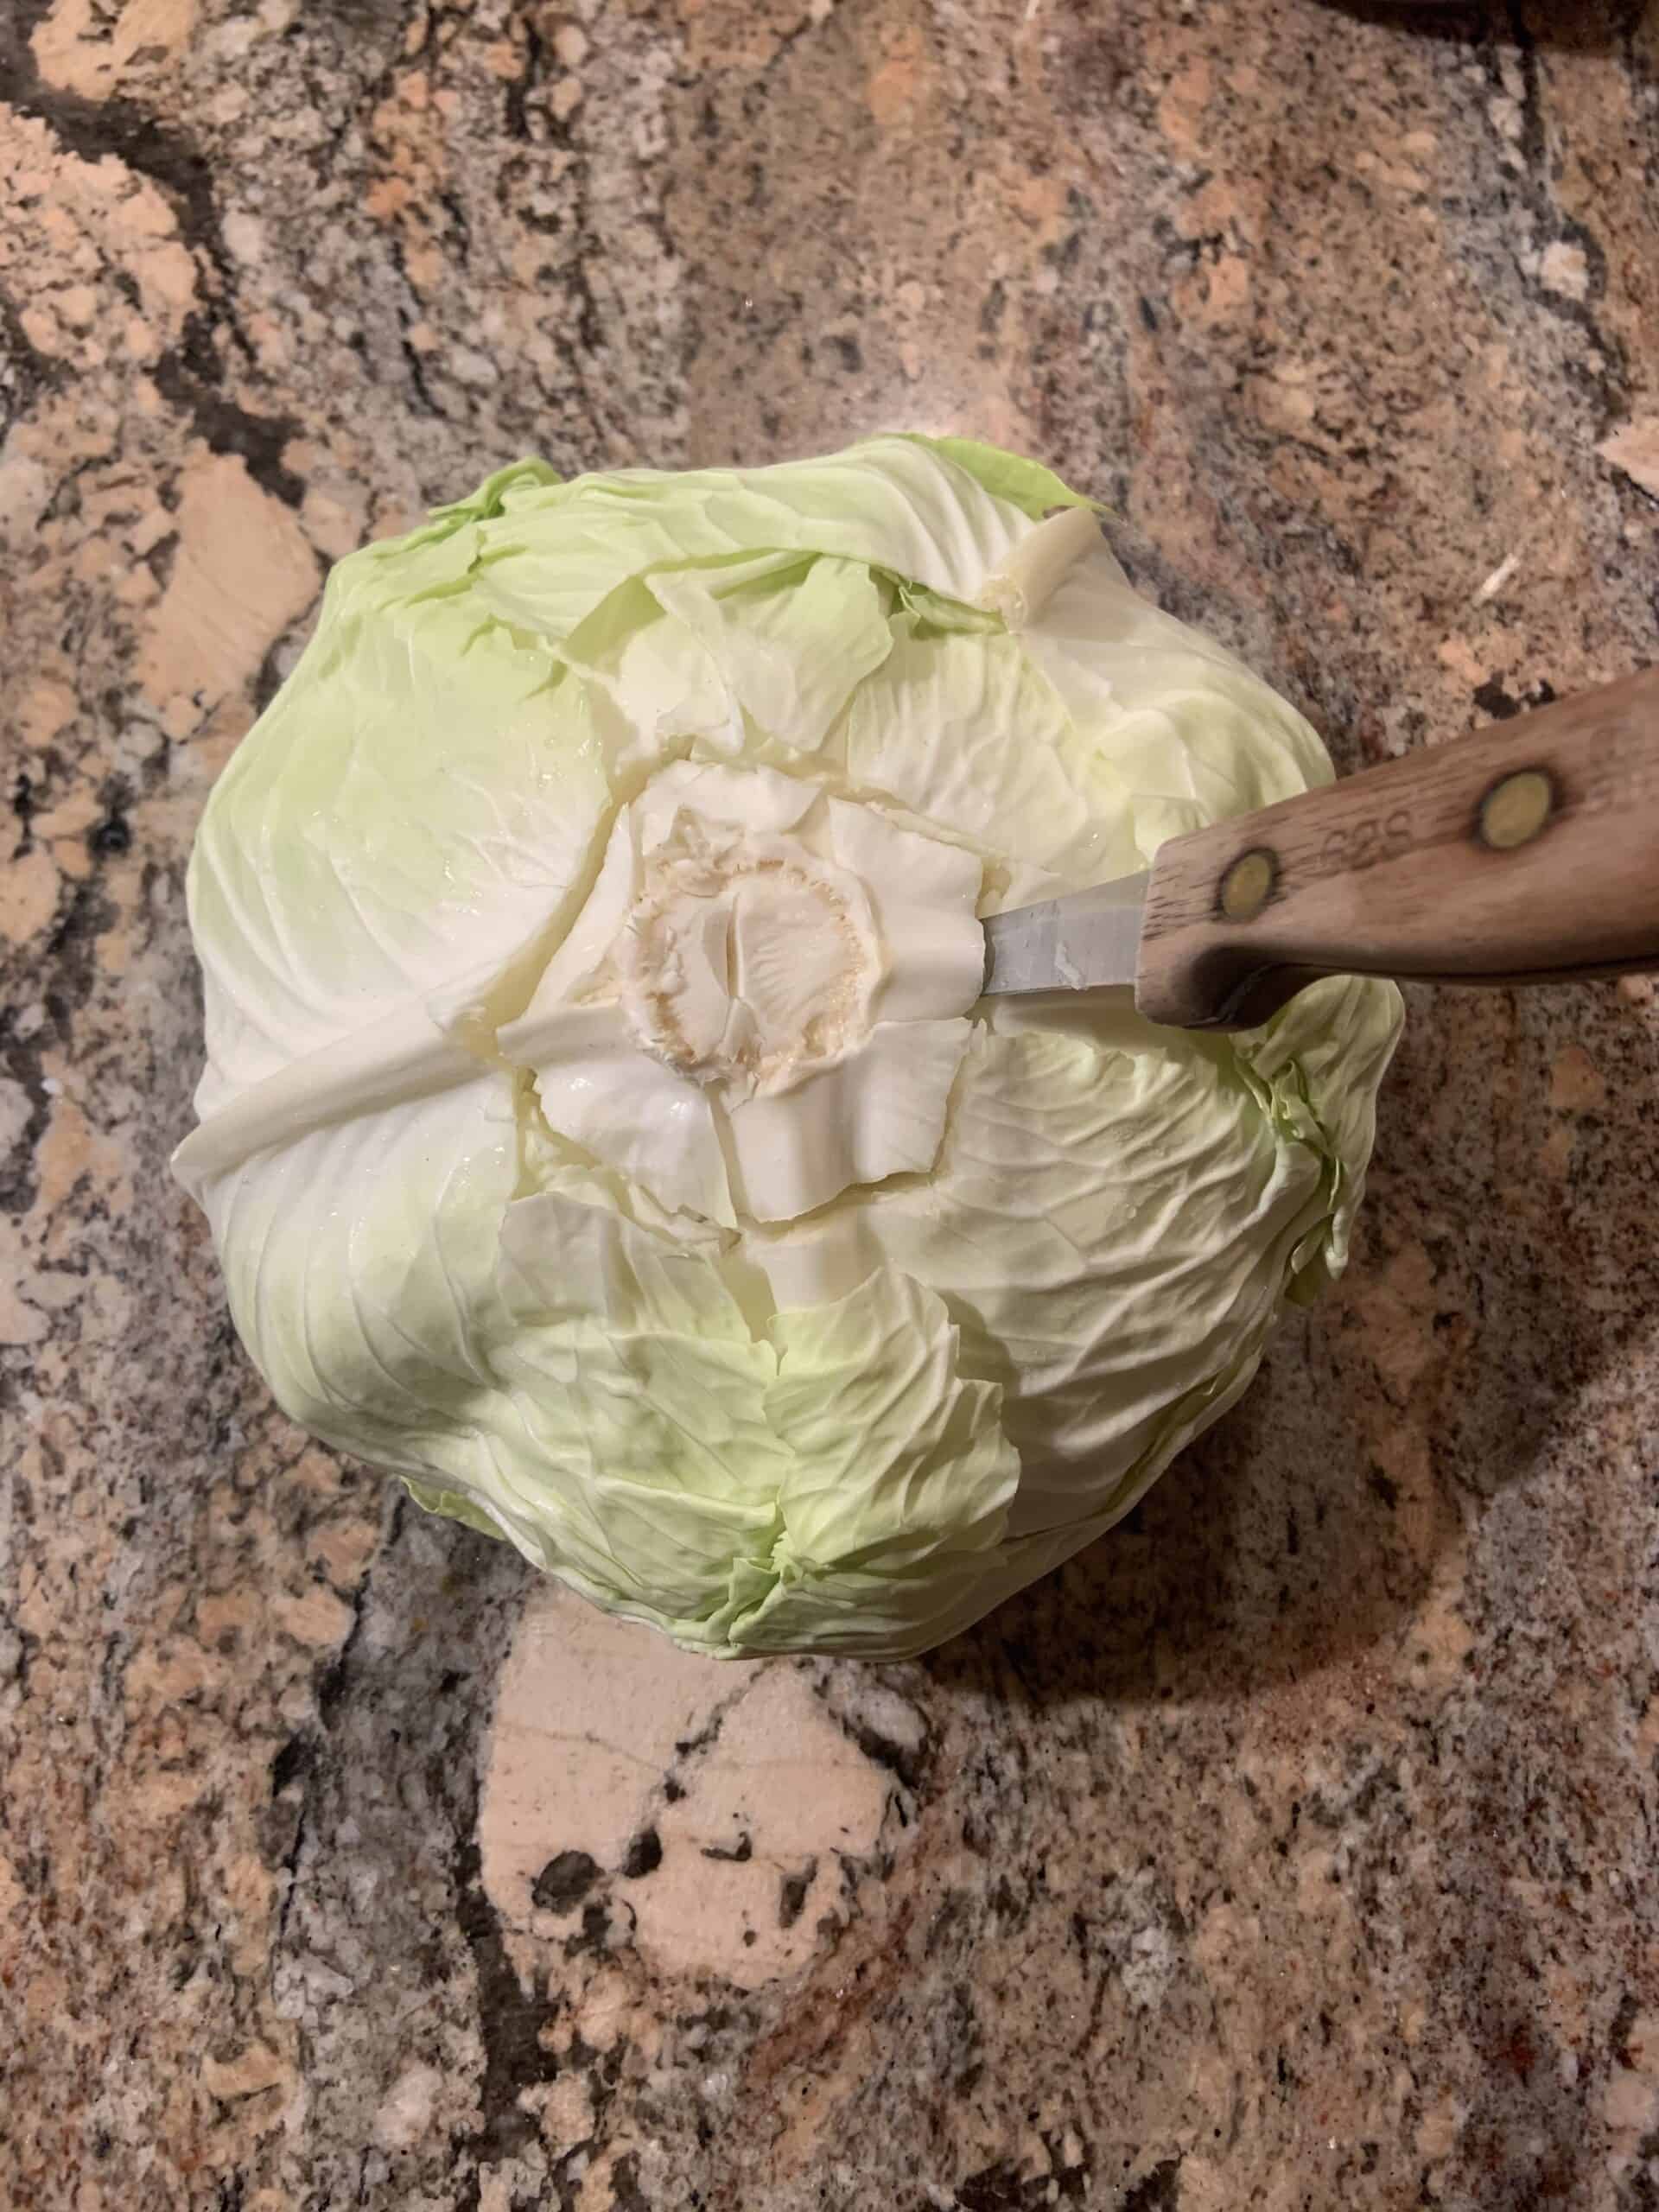 Cutting the core out of the cabbage.